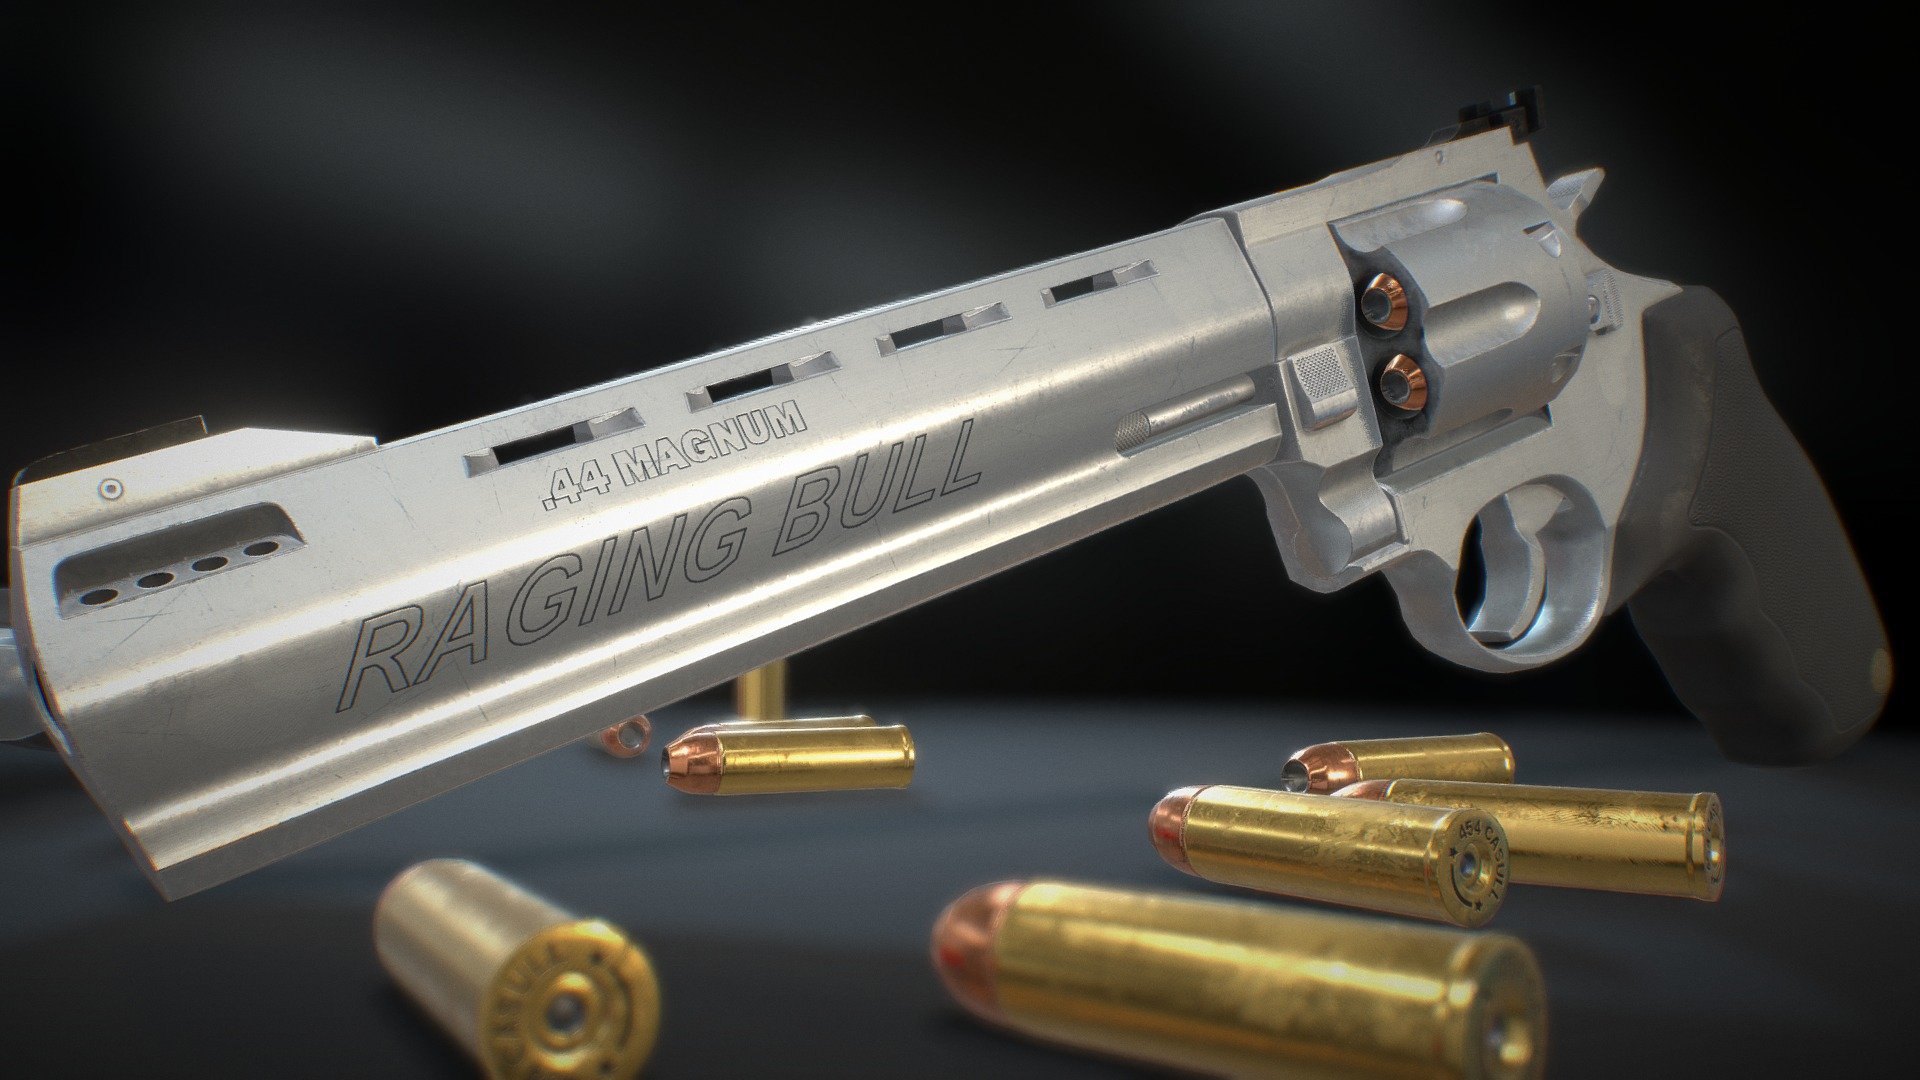 Hard surface and PBR Study based on the famous 44Magnum from Taurus.

Fully textured in Substance Painter.

-

3D Model information:

Game-ready high quality asset fully modeled and operational. (All parts are separated).

Bullets are also available in the .Fbx file with a separate Texture Set for ease of use.

PBR Textures are in 4K resolution  (Metallic/Roughness worflow) - Taurus Raging Bull - by Jonathan BENAINOUS - Buy Royalty Free 3D model by jonathanbenainous 3d model